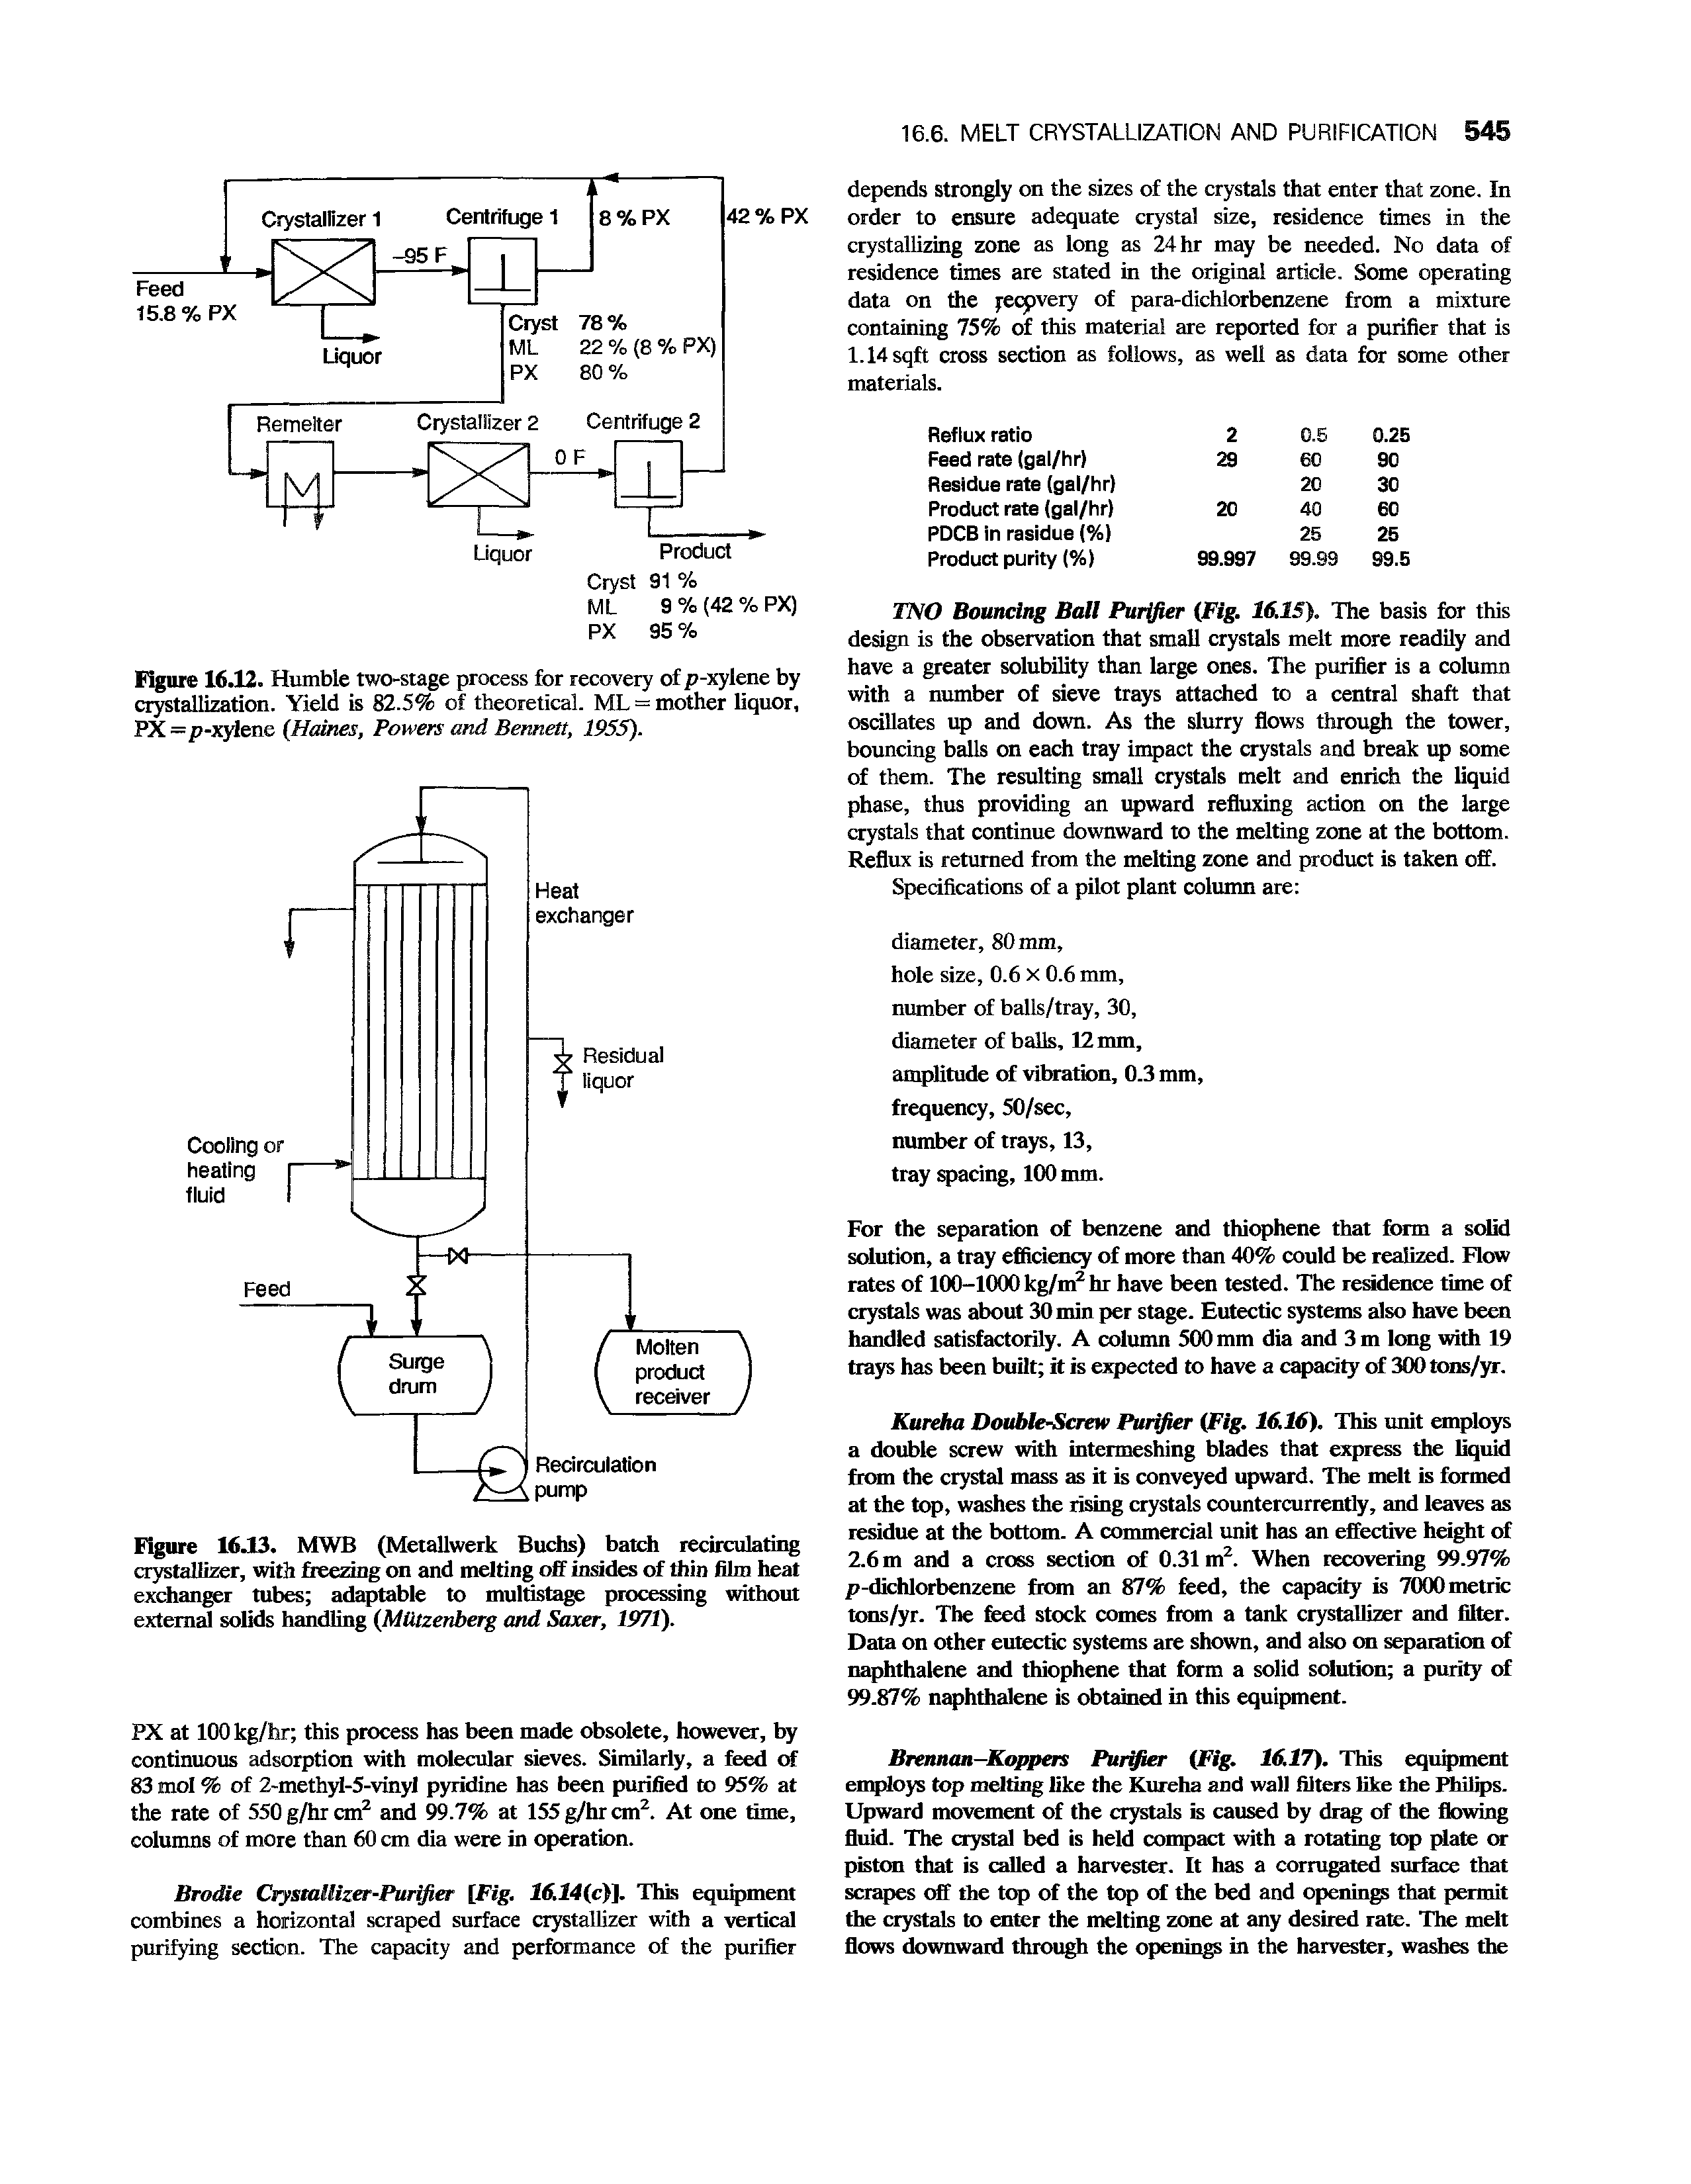 Figure 16.13. MWB (Metallwerk Buchs) batch recirculating crystallizer, with freezing on and melting off insides of thin film heat exchanger tubes adaptable to multistage processing without external solids handling [Miitzenberg and Saxer, 1971).